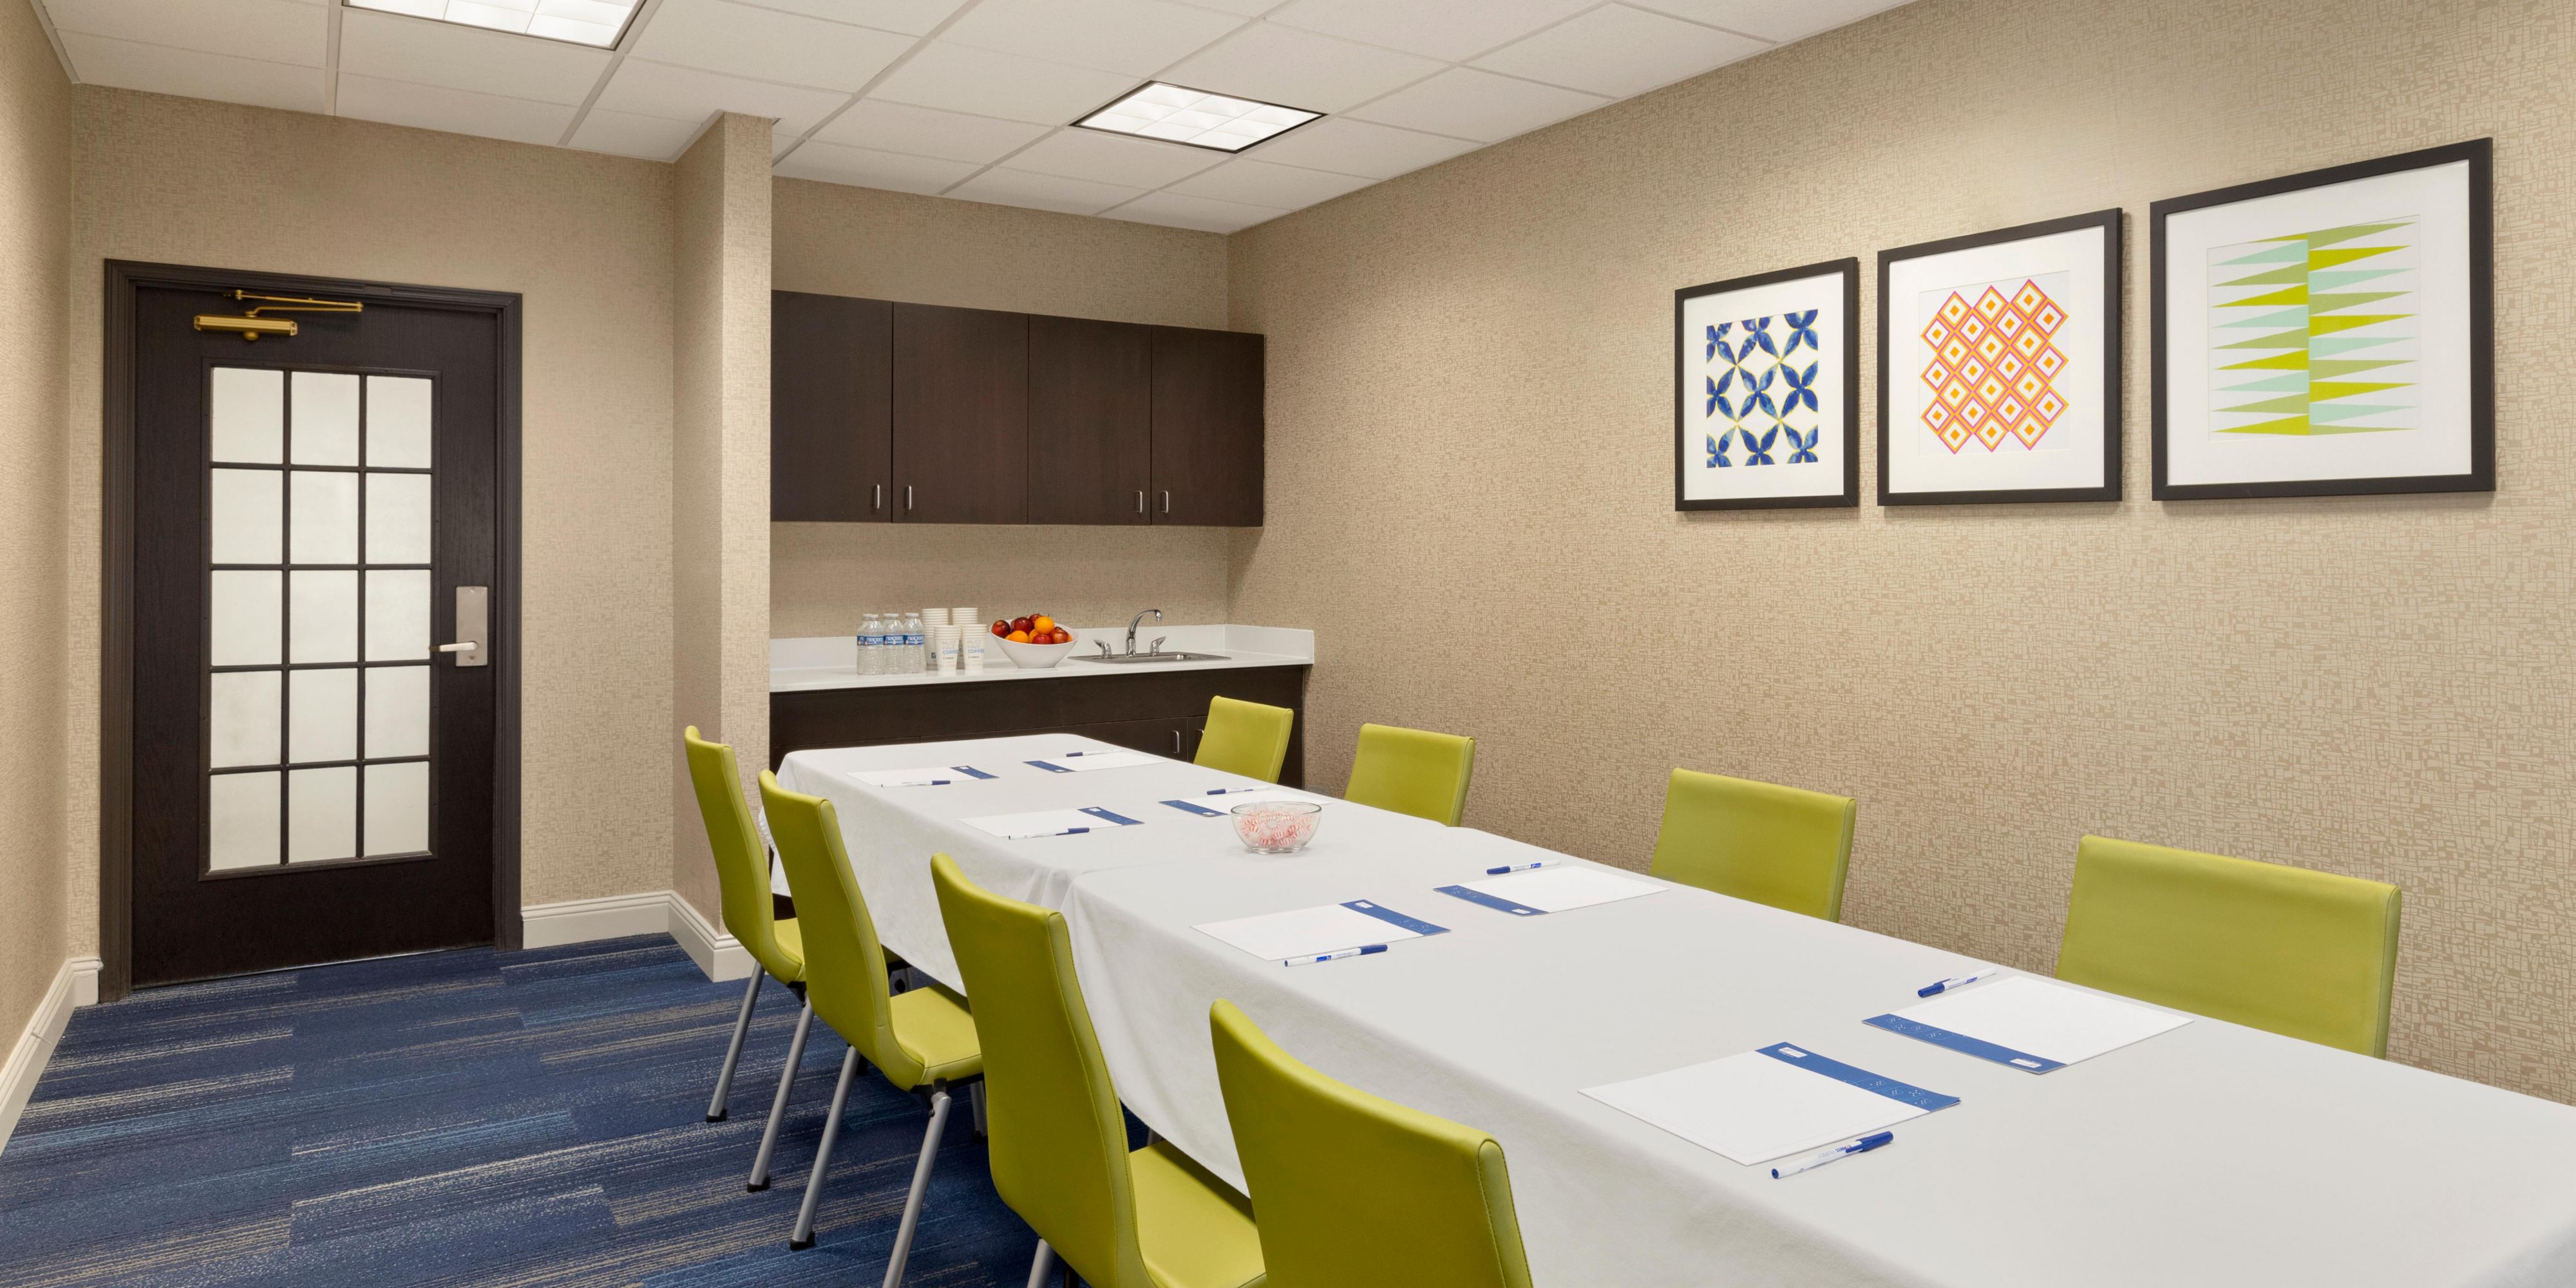 Host a formal business meeting in our small-scale meeting space which can accommodate up to 12 people for conference-style and classroom-style seating, and 25 for classroom-style. Contact our sales office for your next event.